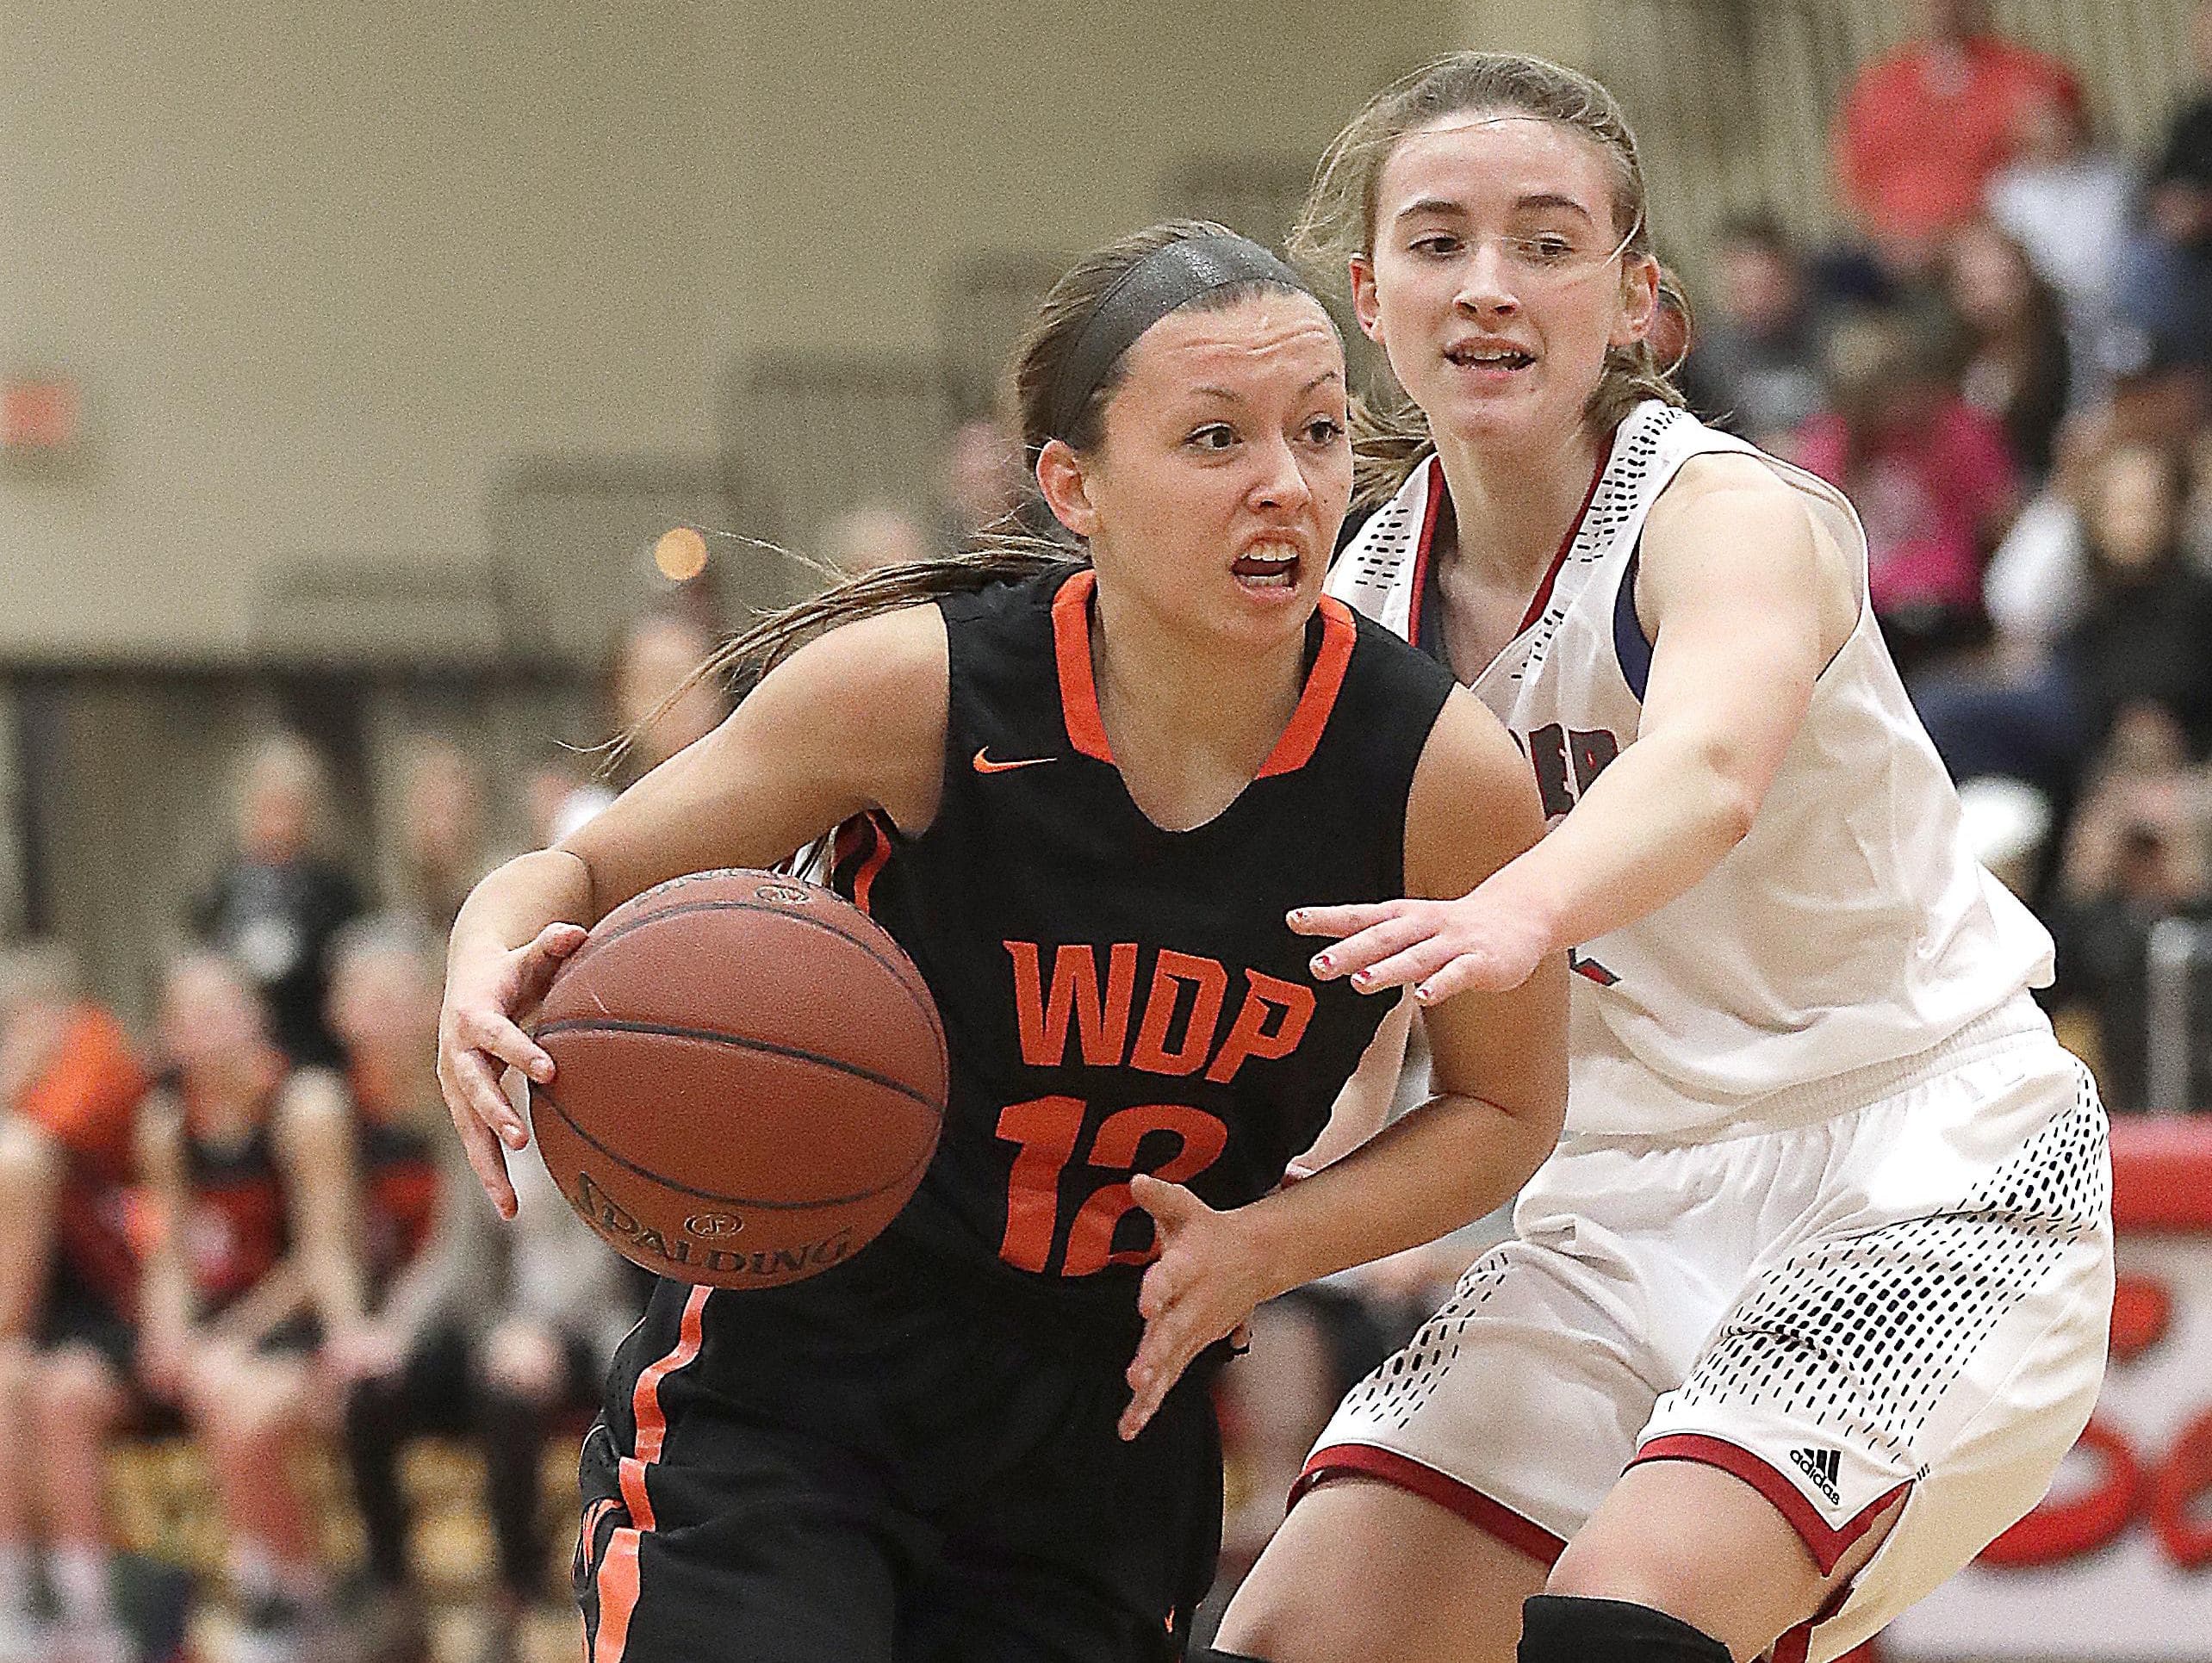 West De Pere senior Liz Edinger drives to the basket to score her 1,000th career point on Thursday at Seymour in a Bay Conference girls basketball game.